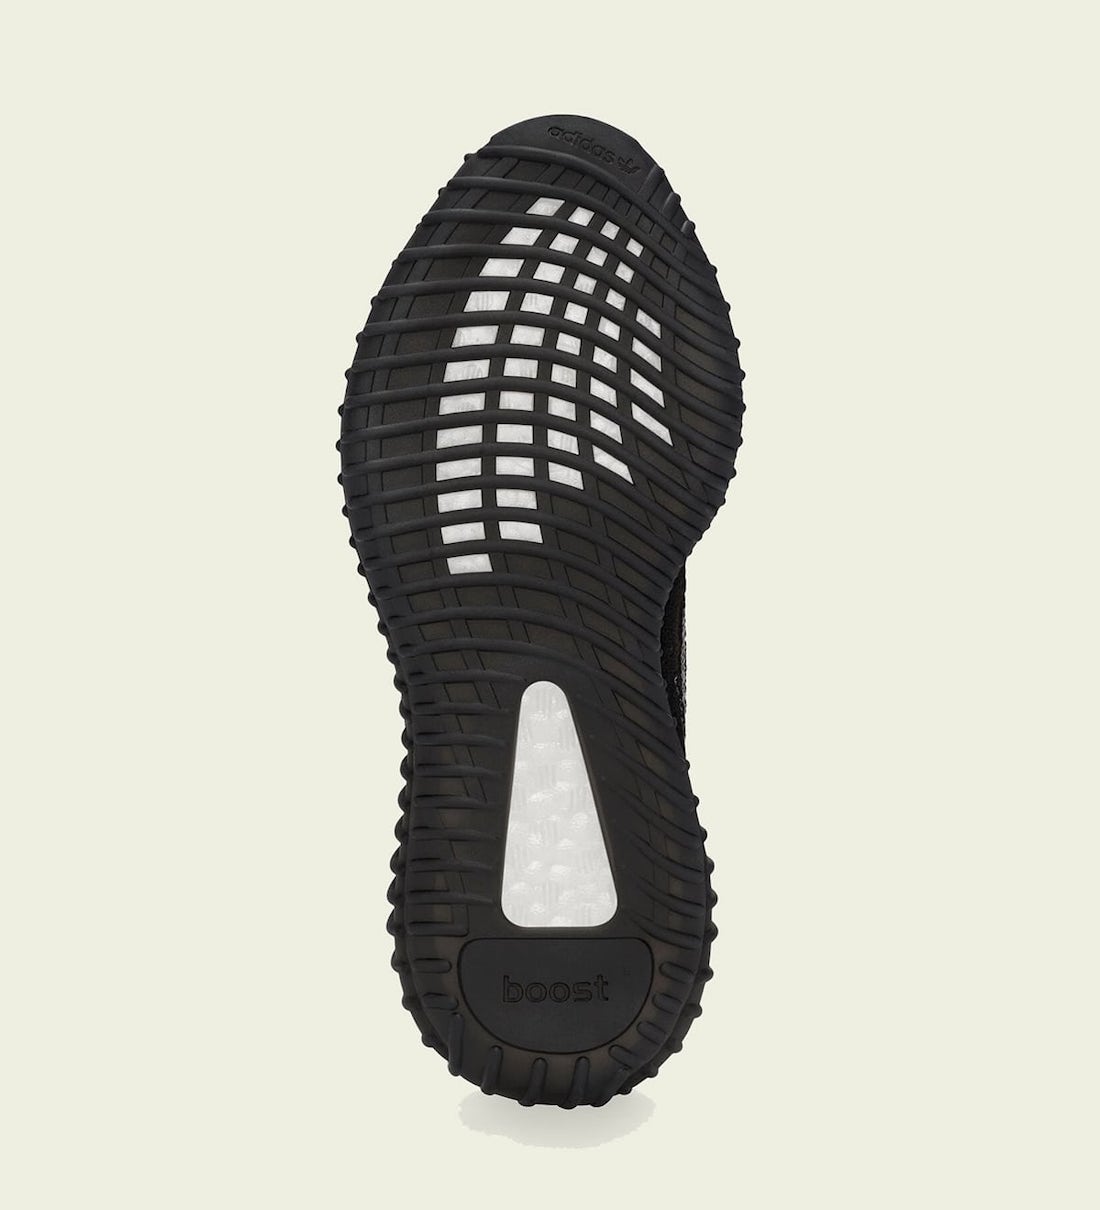 adidas-Yeezy-Boost-350-V2-MX-Rock-GW3774-Release-Date-Price-4